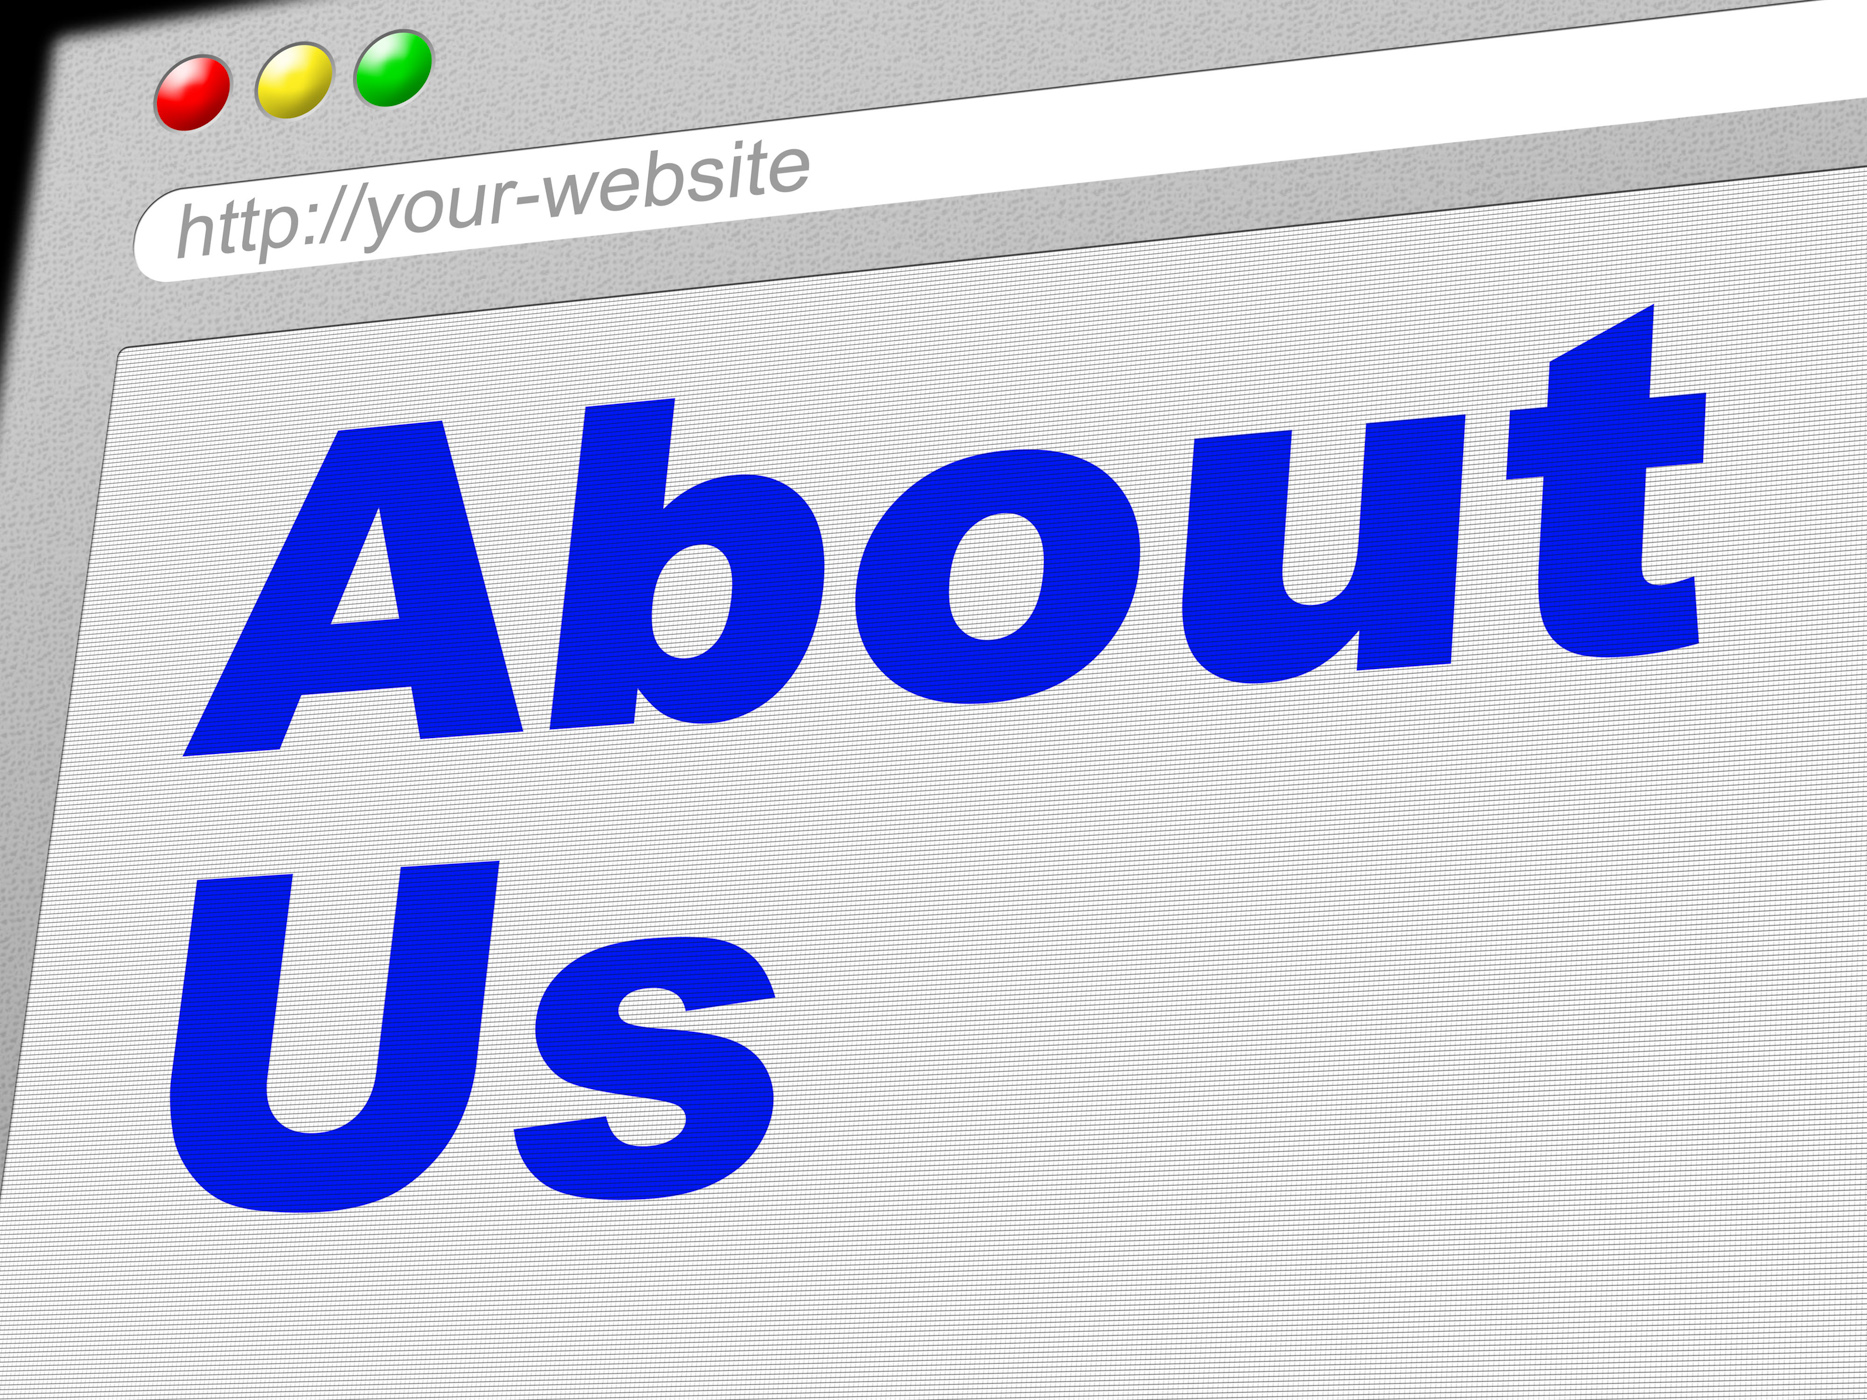 About us indicates world wide web and about-us photo